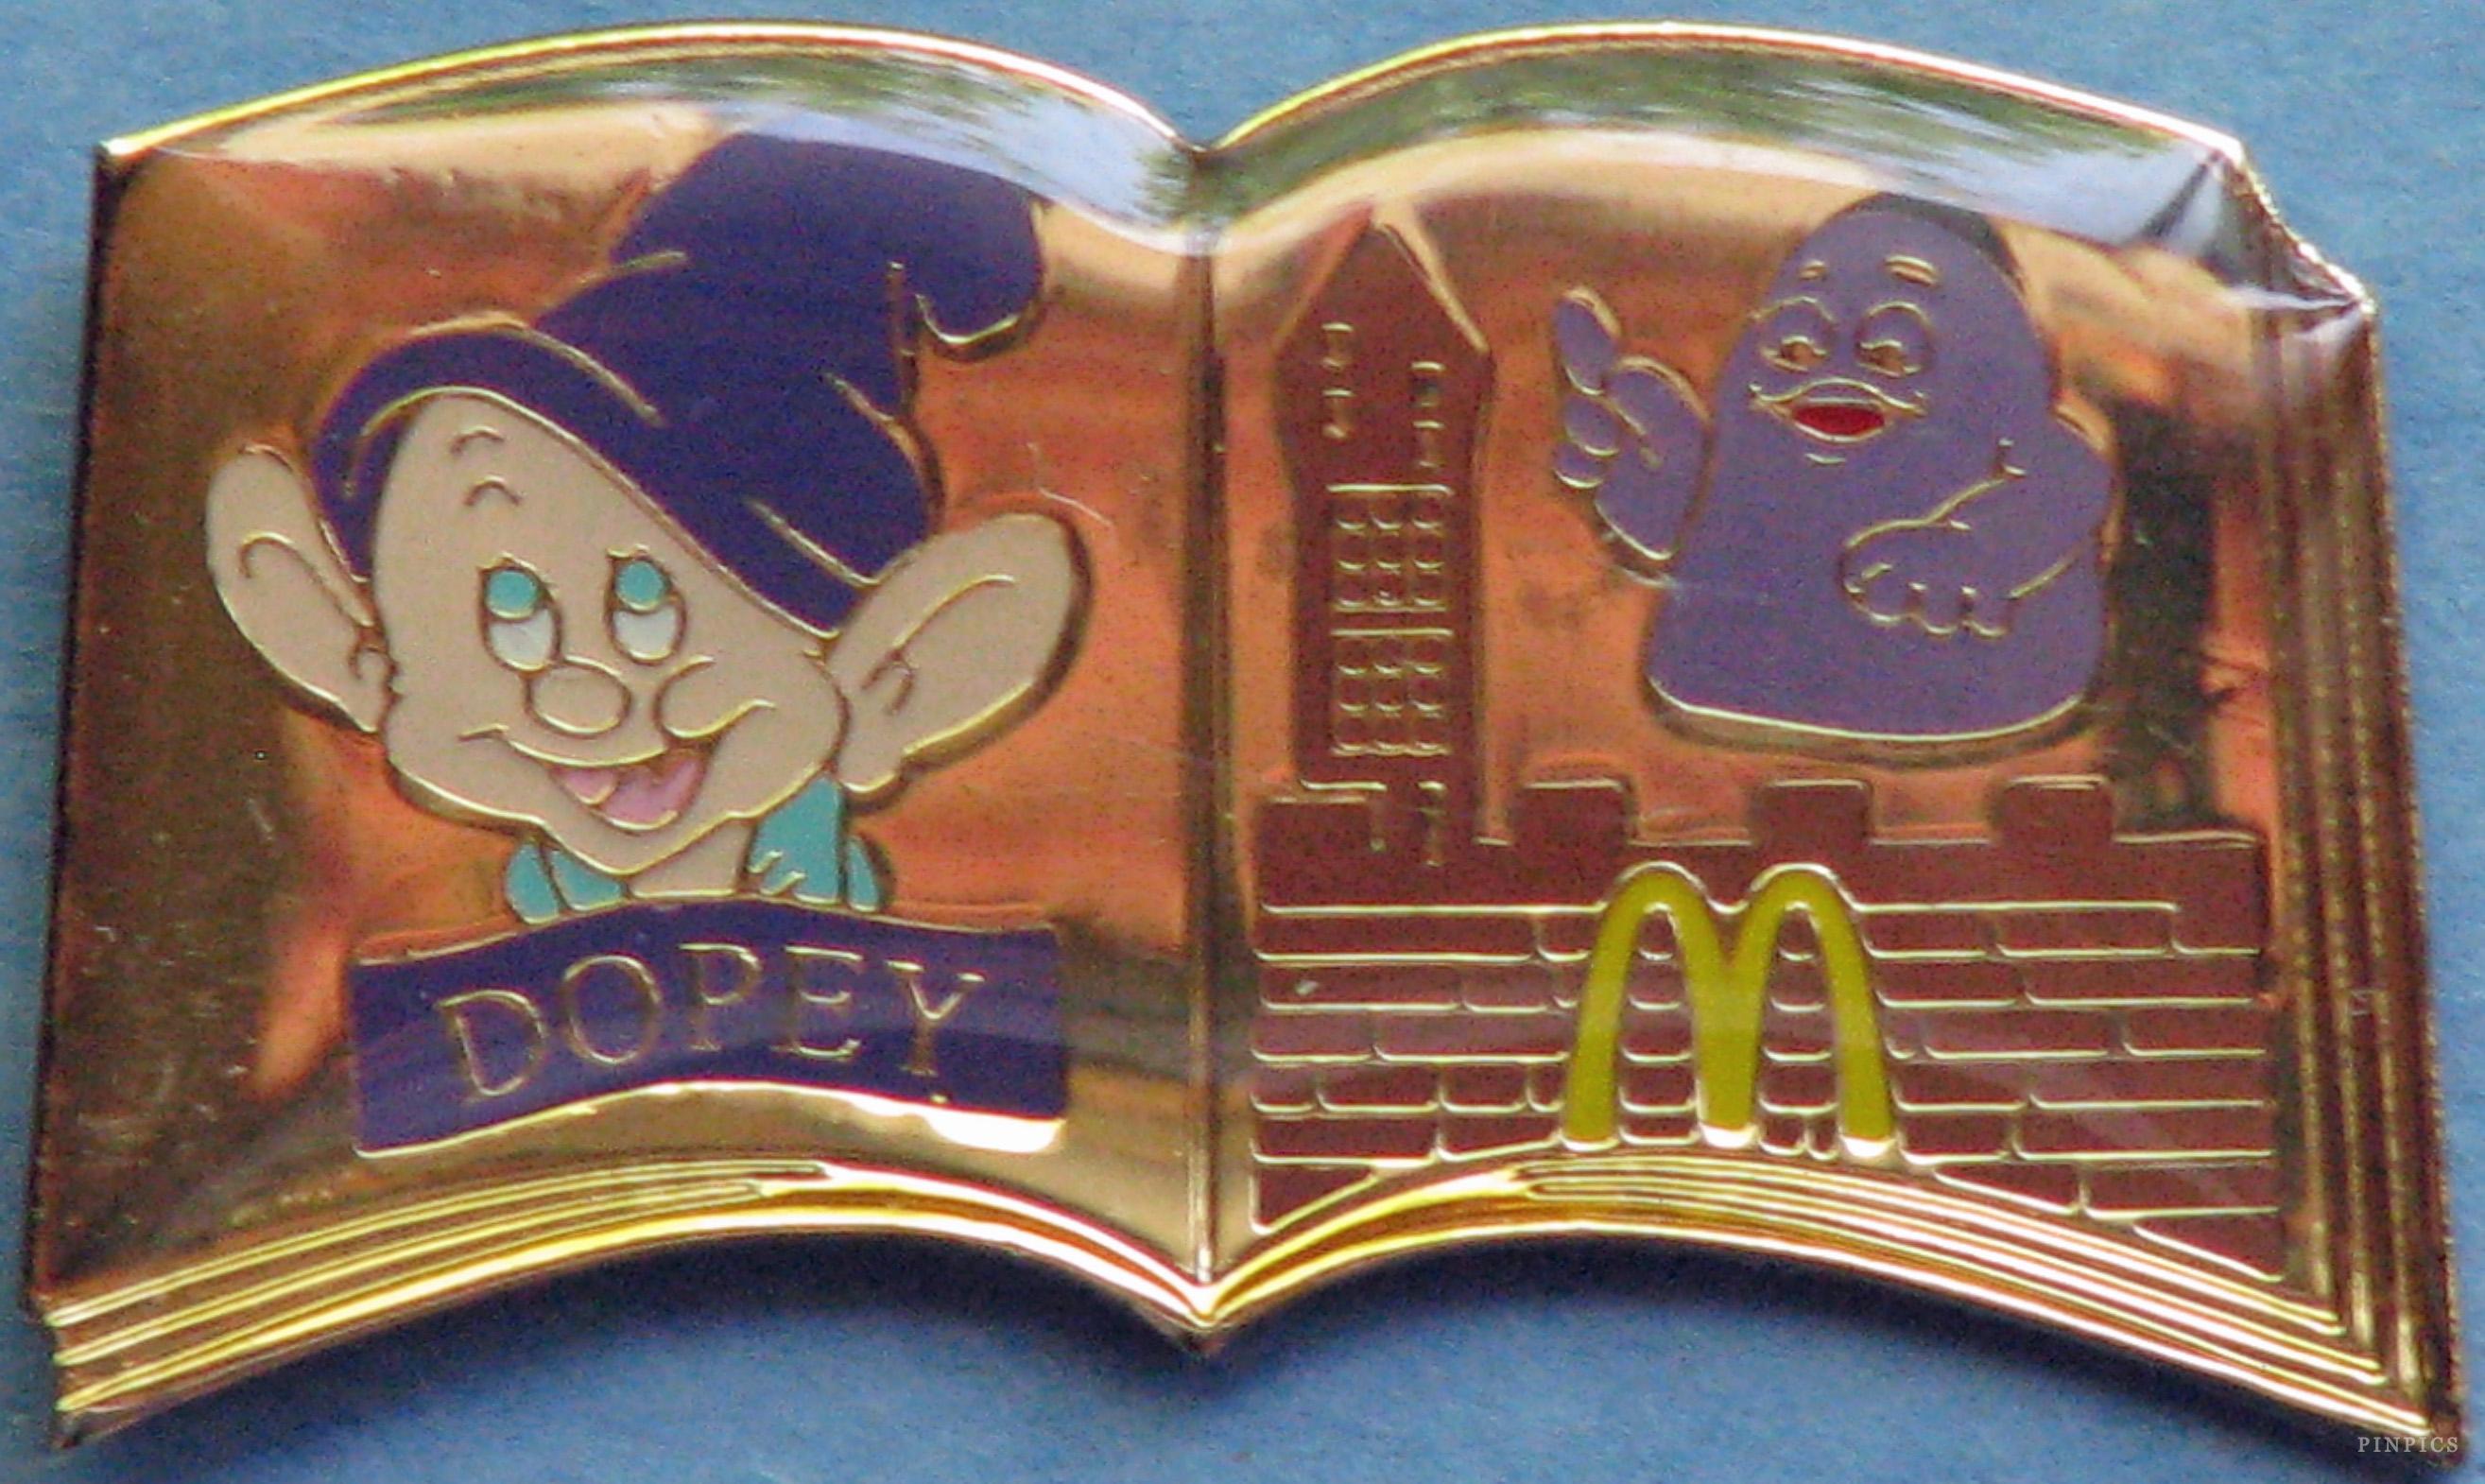 Bootleg - 'DOPEY' in a McDonald's Open Book with Grimace